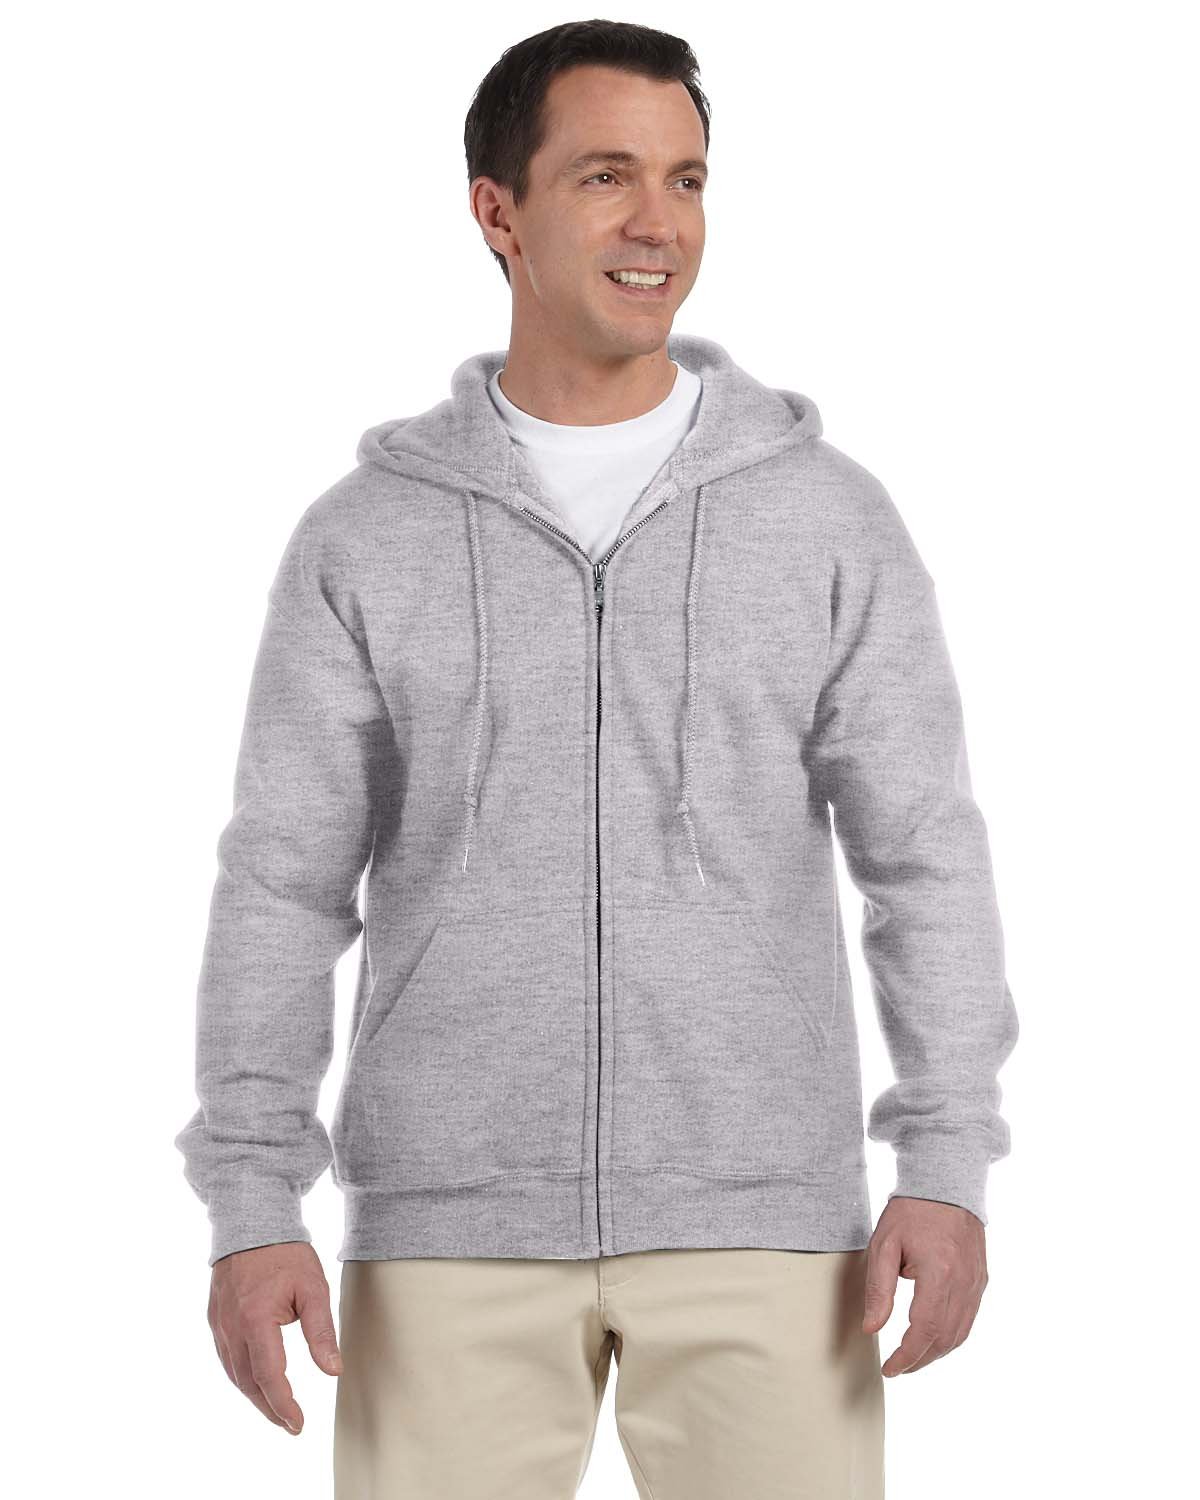 stay-cozy-and-fashionable-with-the-gildan-adult-dryblend-50-50-full-zip-hooded-sweatshirt